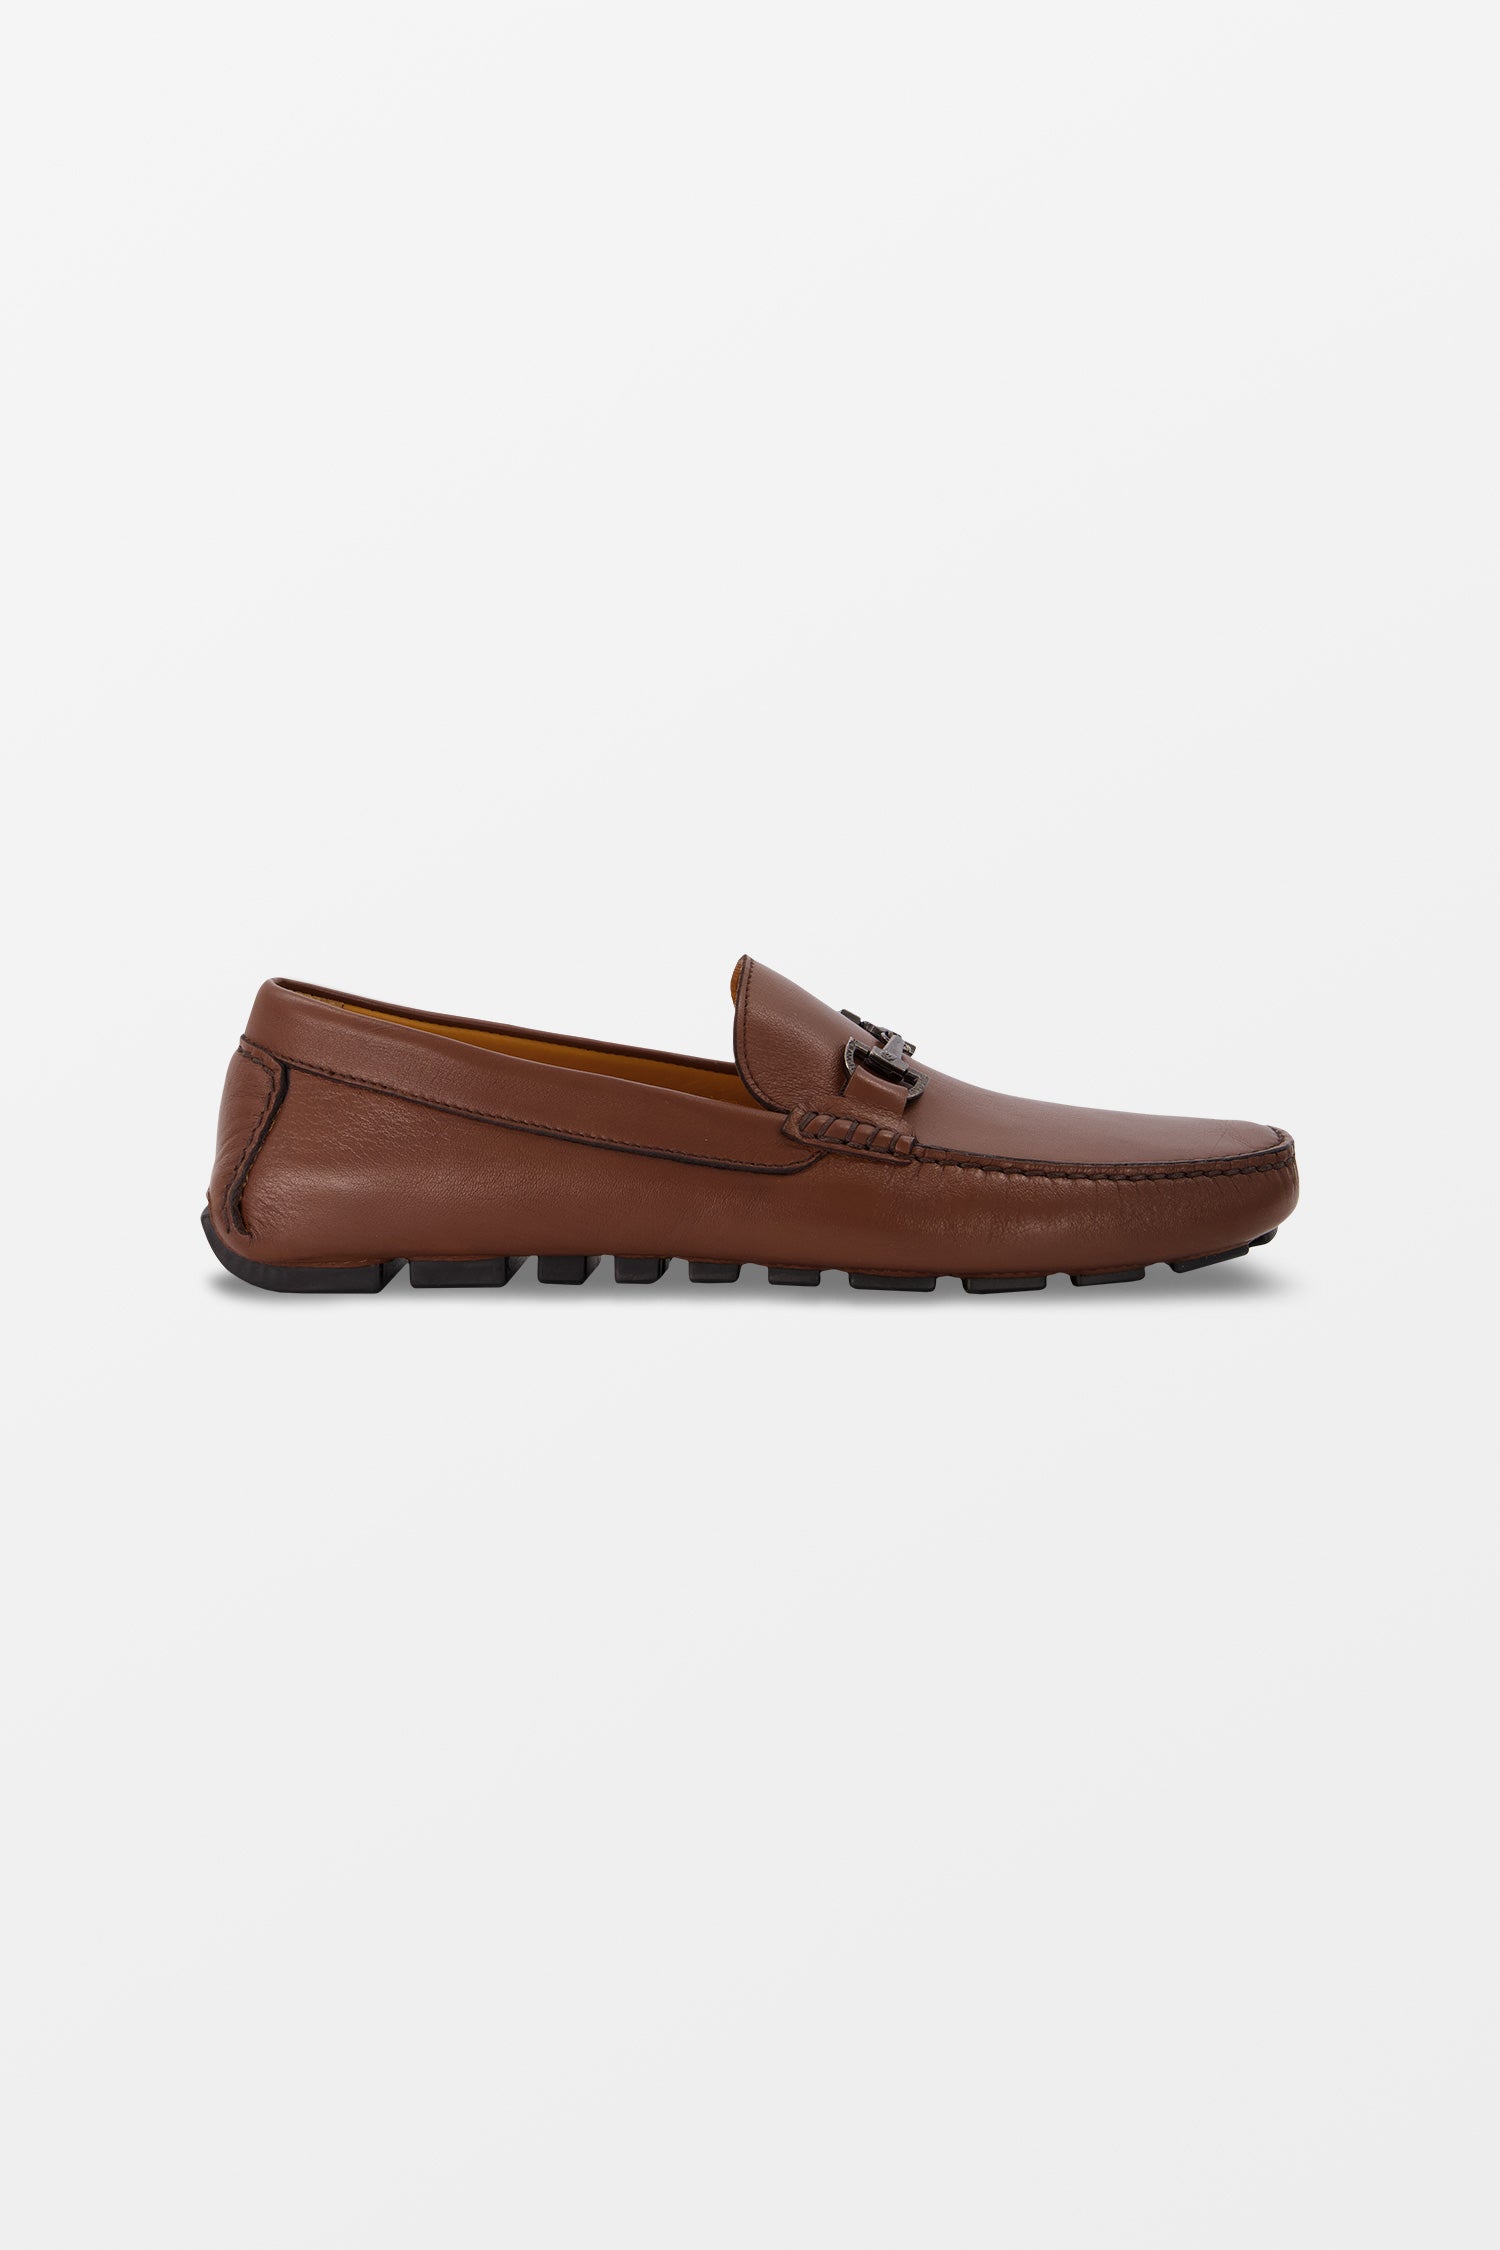 Fiorangelo Leather Brown Moccasins